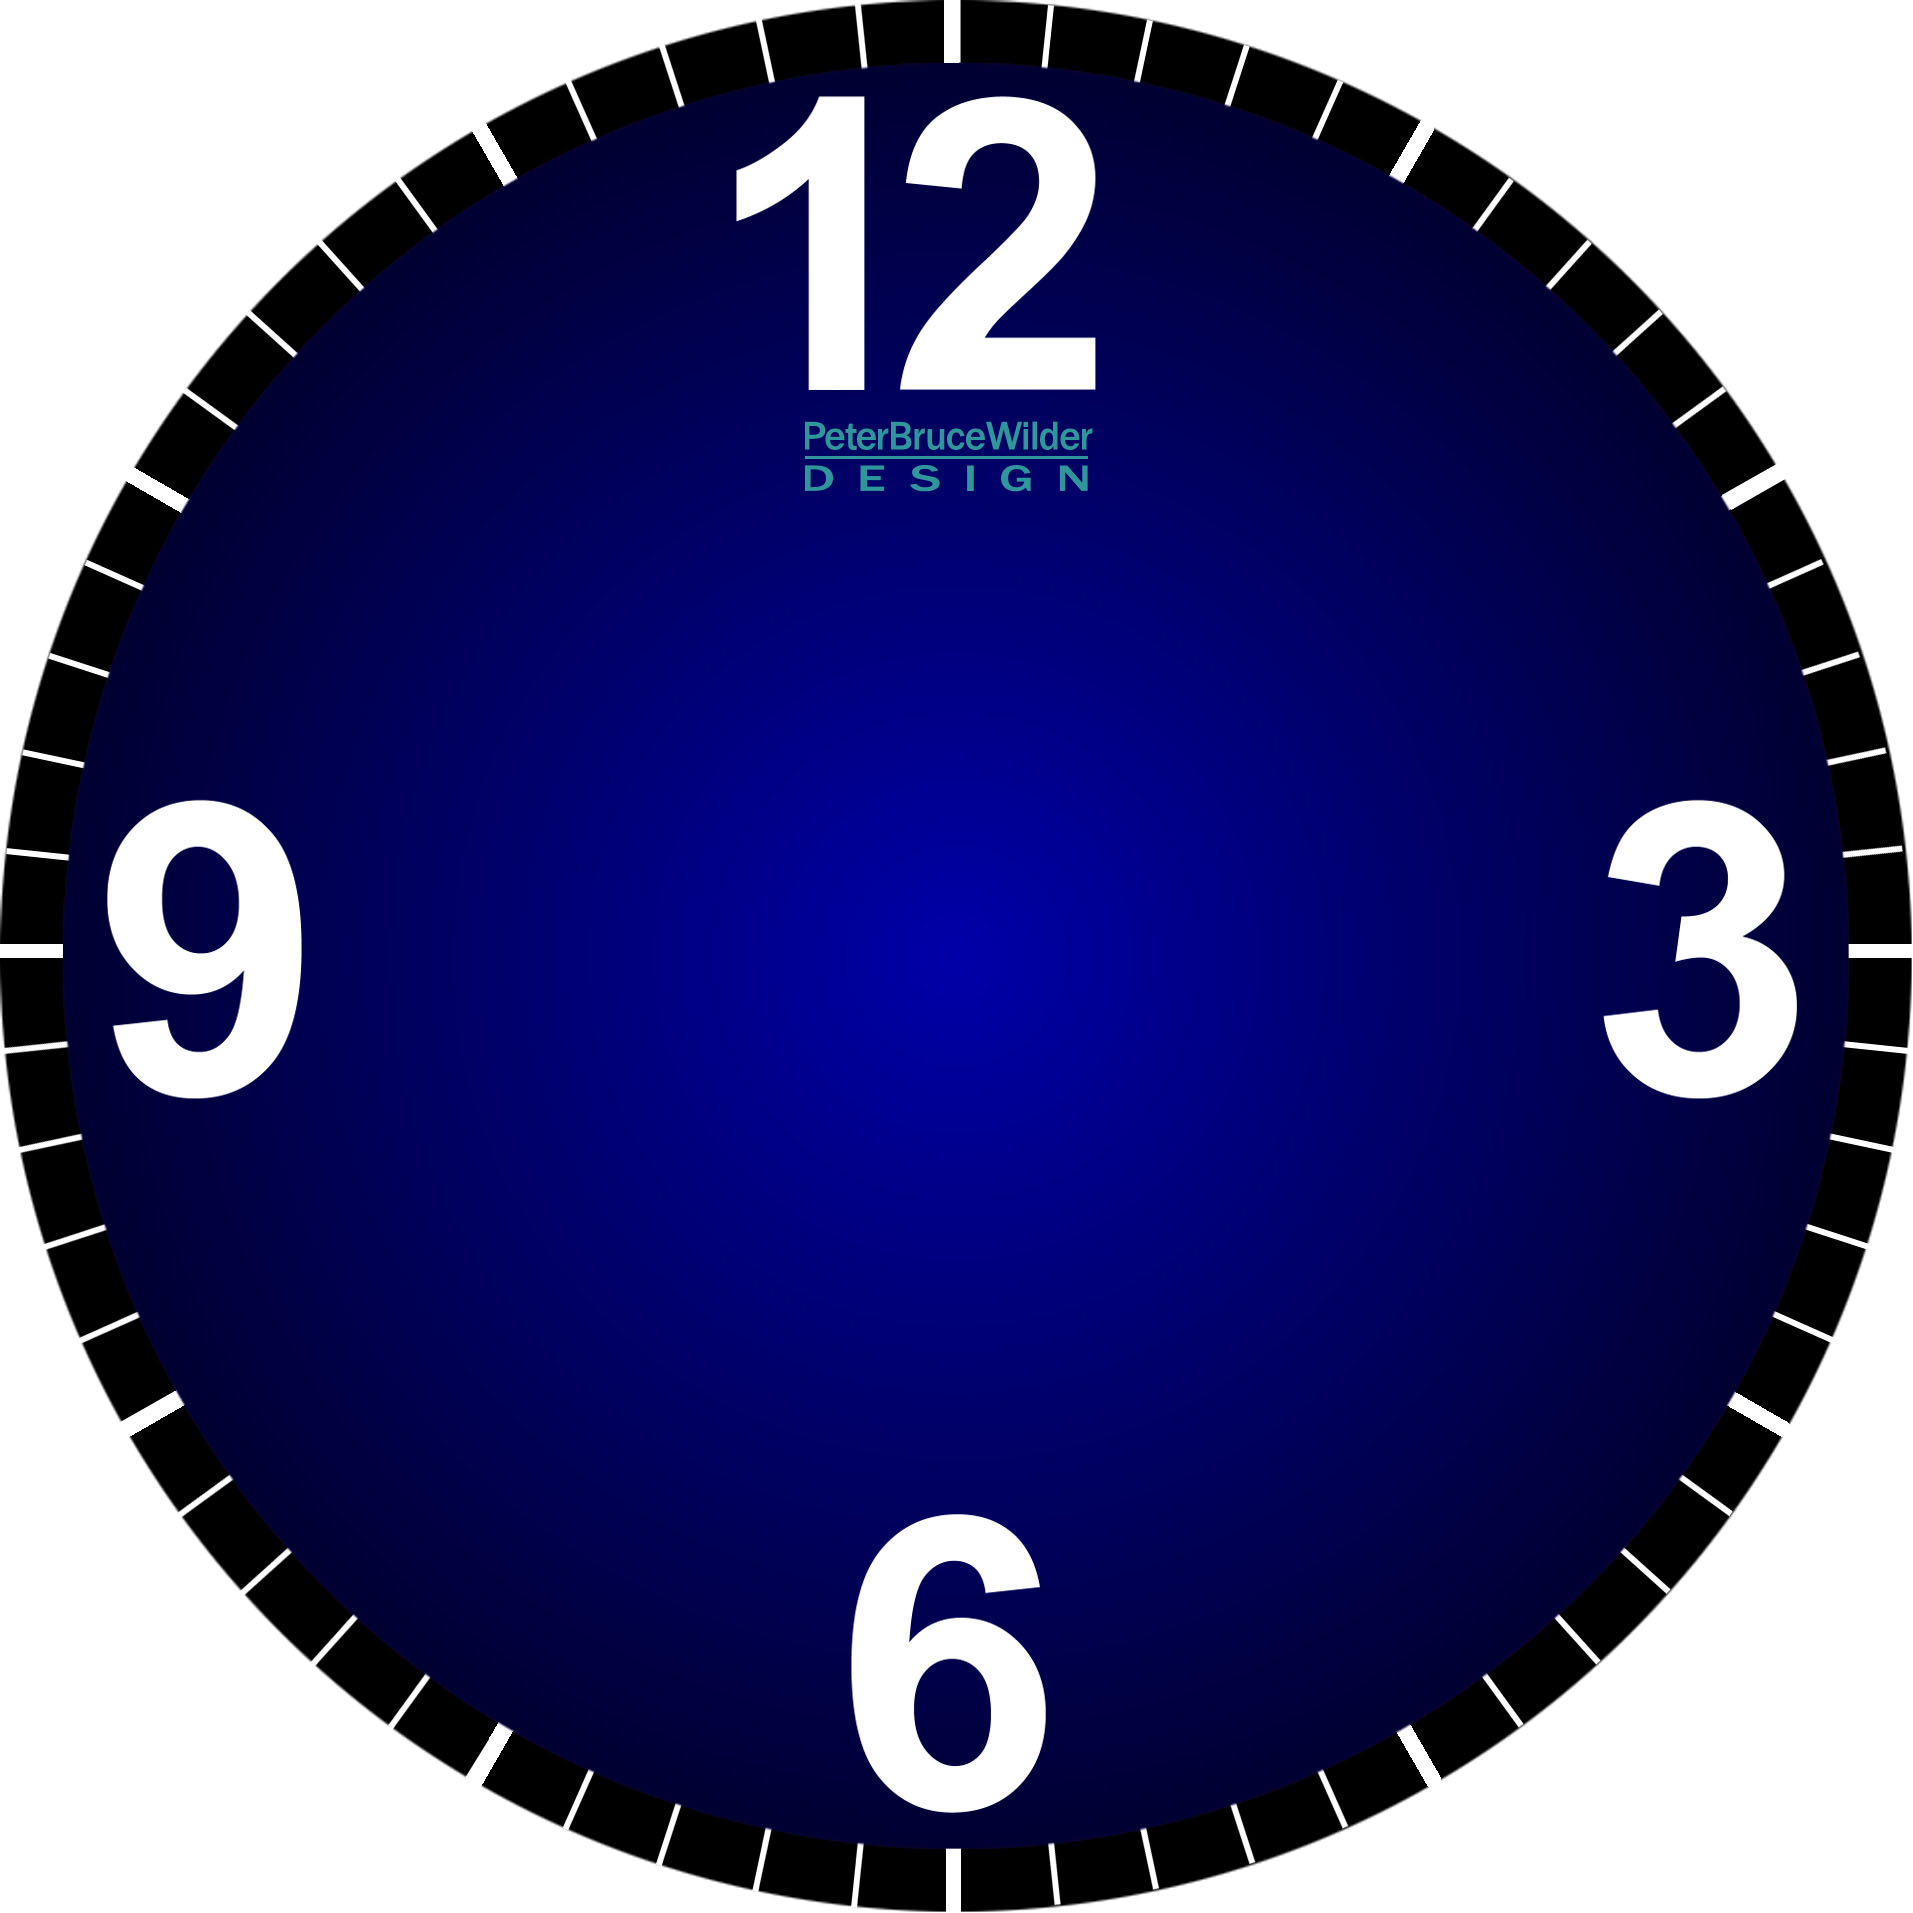 Printable Analog Clock Face - ClipArt Best